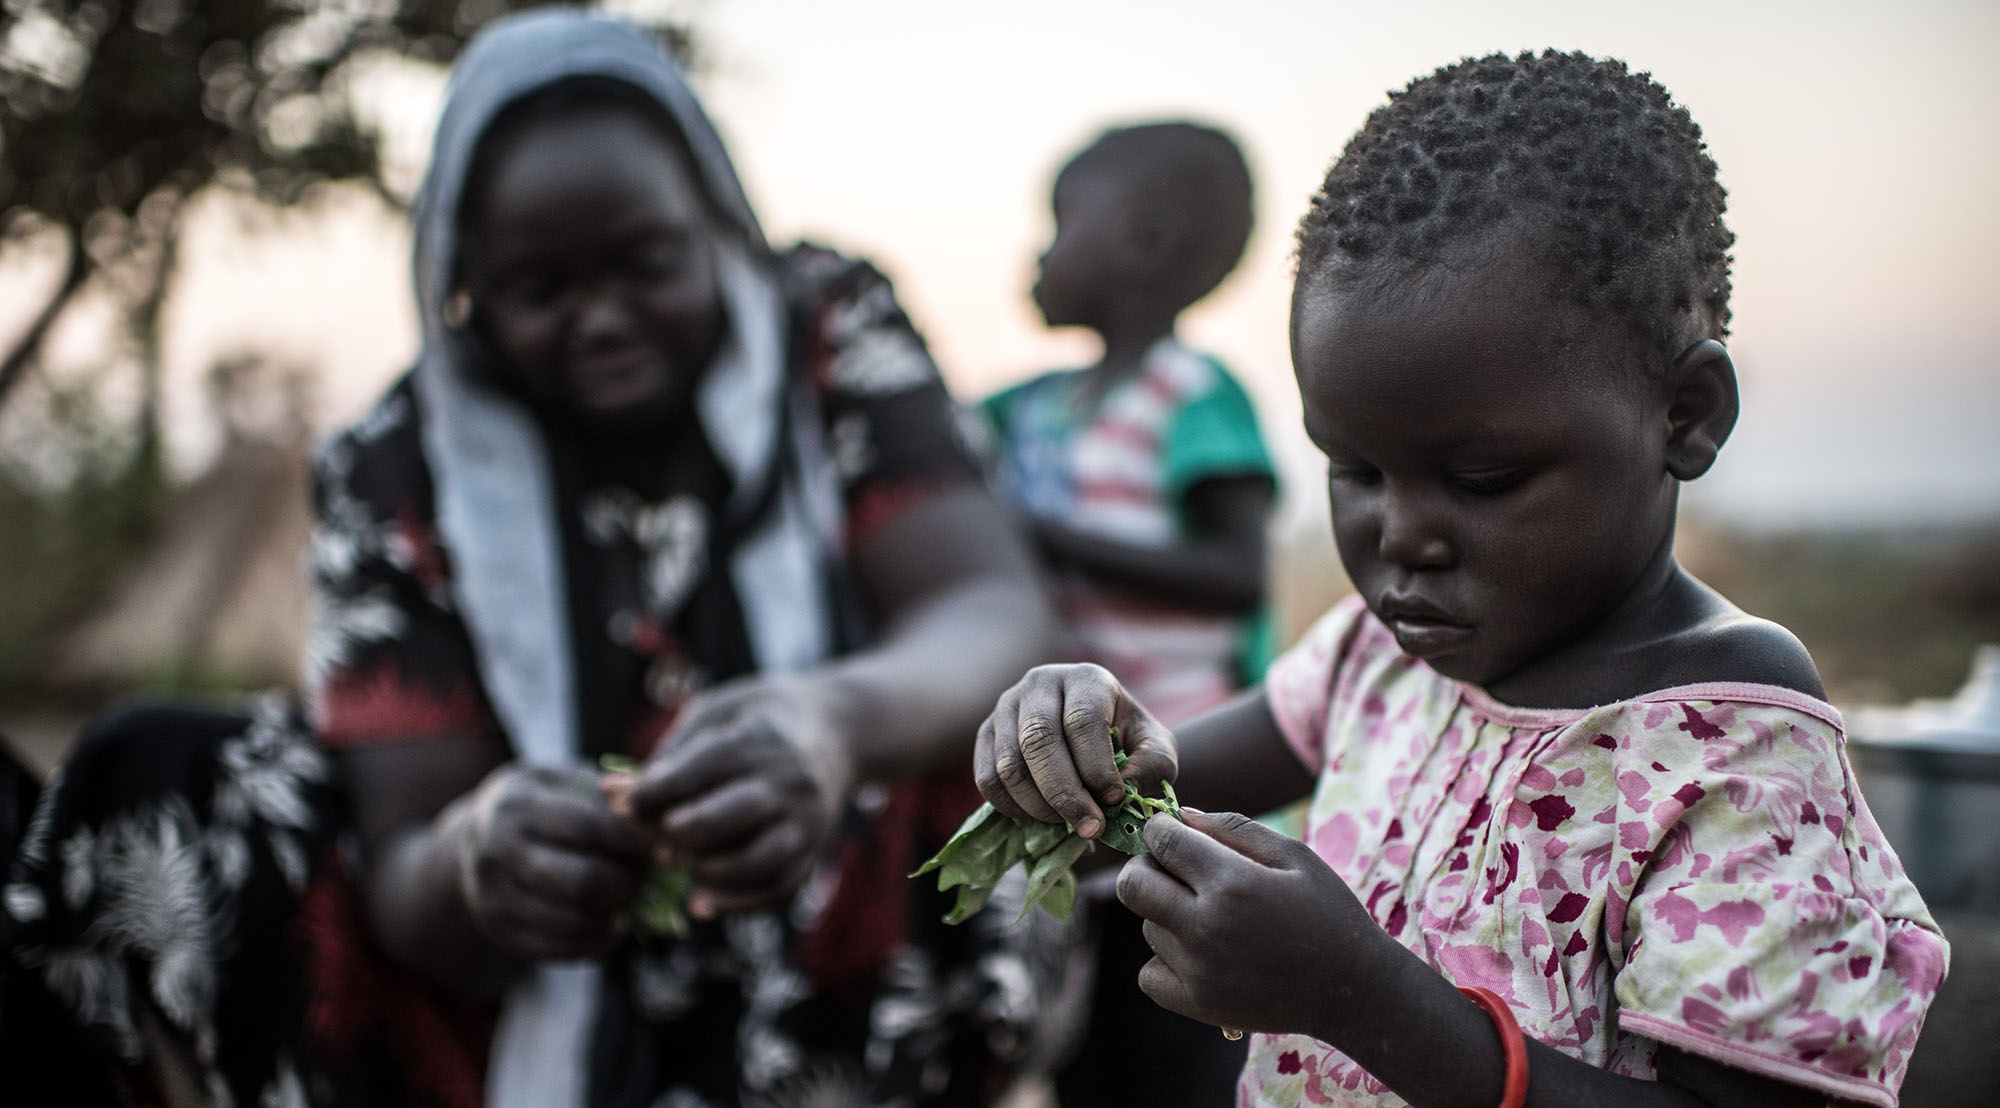 Addressing hunger with more than food - An integrated strategy for South Sudan